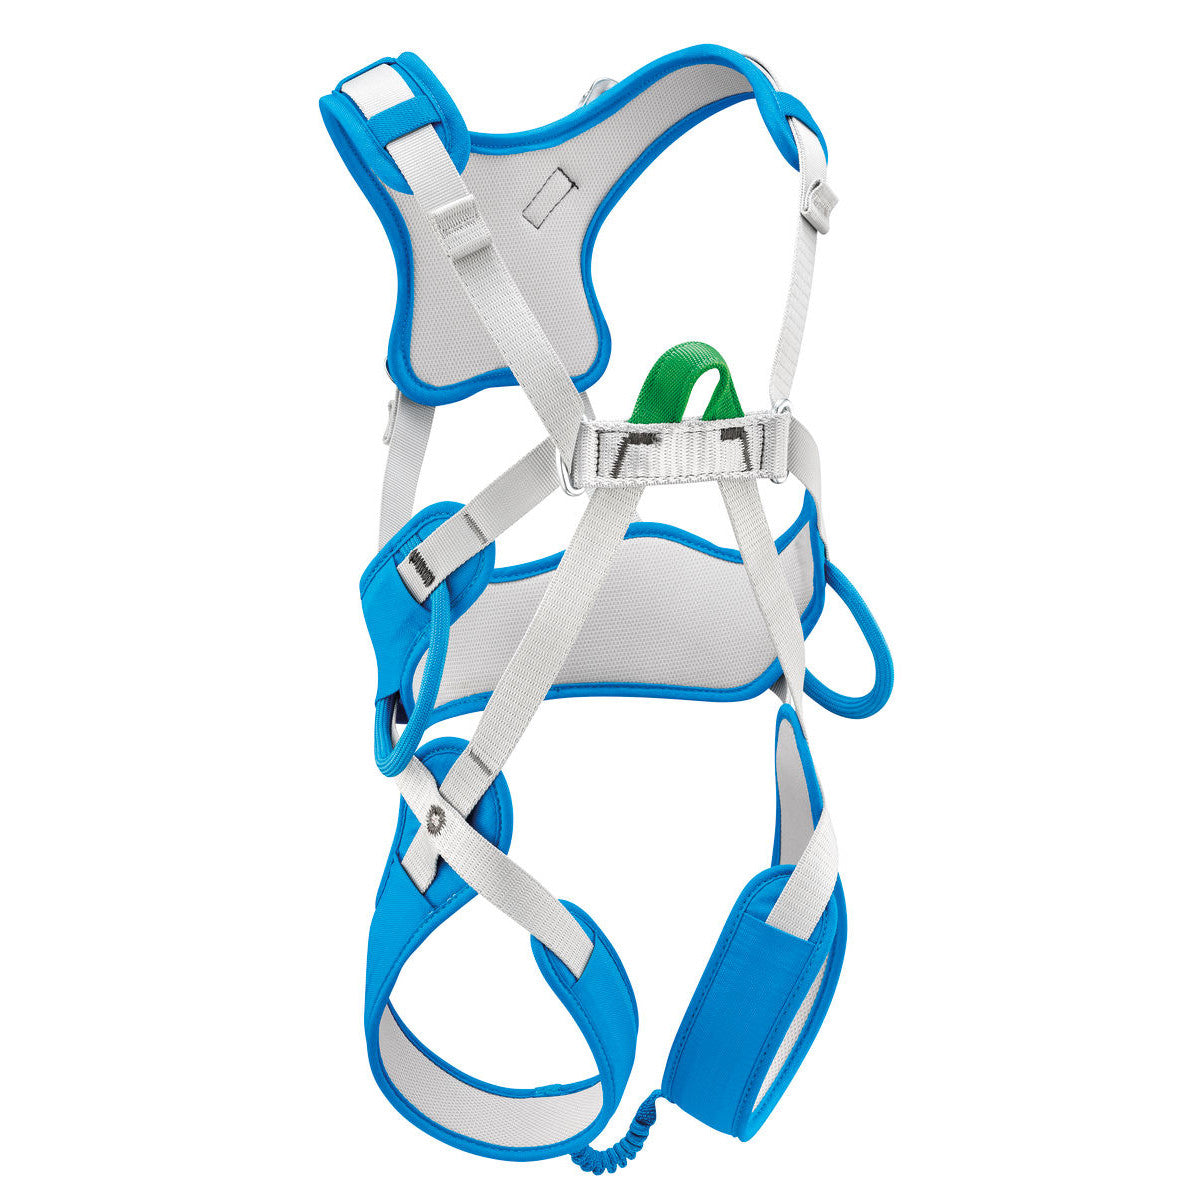 Petzl Ouistiti Kids climbing Harness, front/side view, in Blue and Grey colours